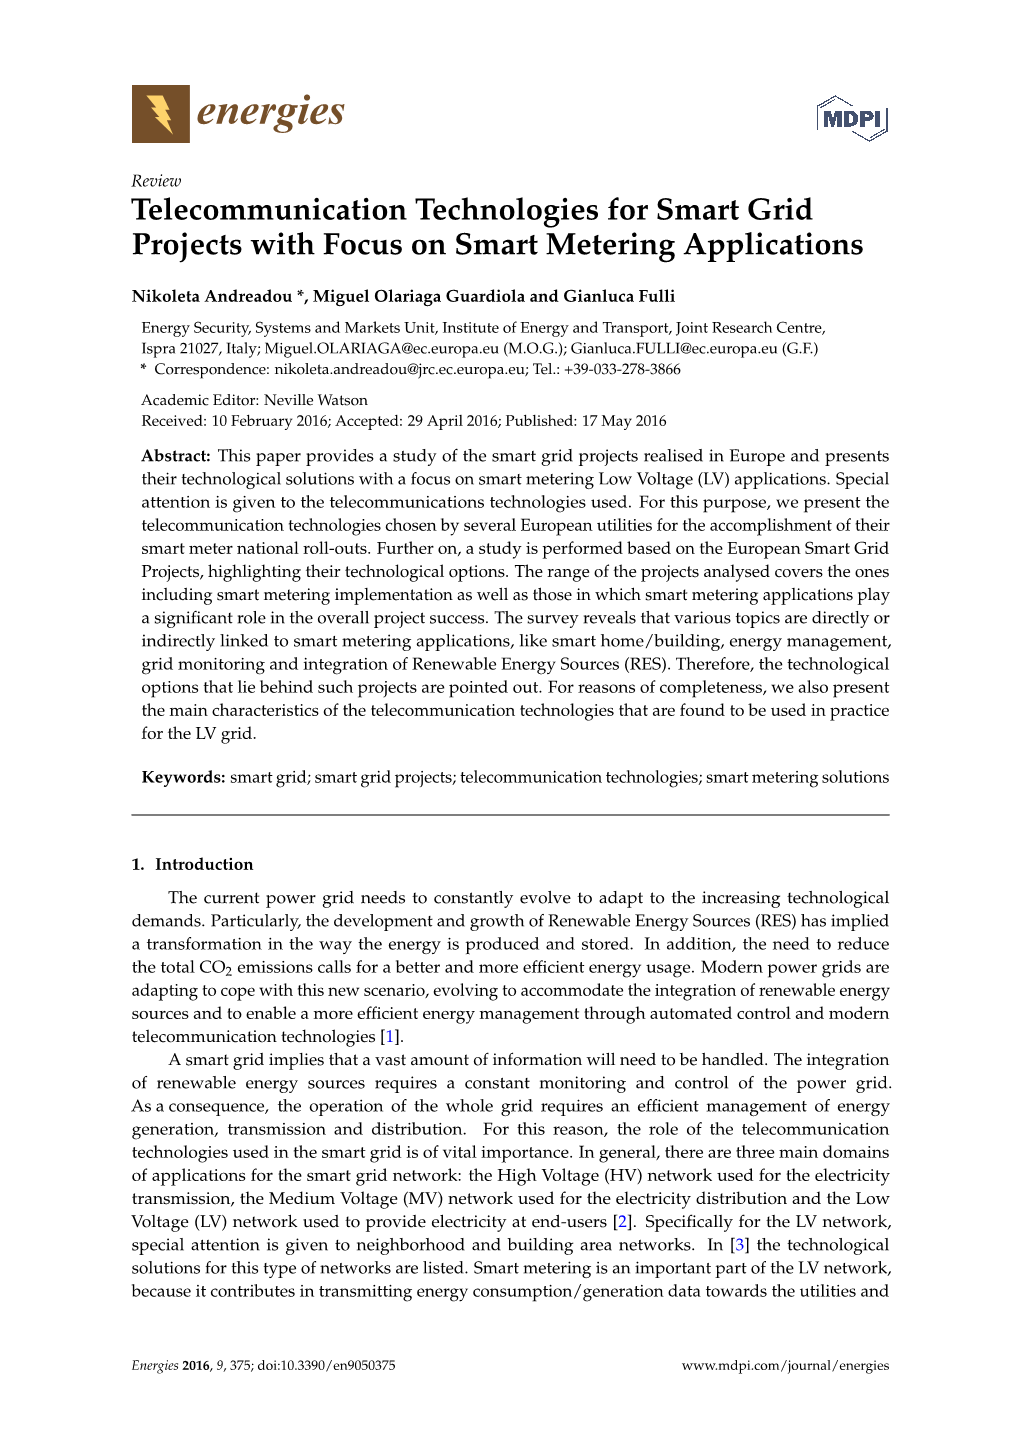 Telecommunication Technologies for Smart Grid Projects with Focus on Smart Metering Applications